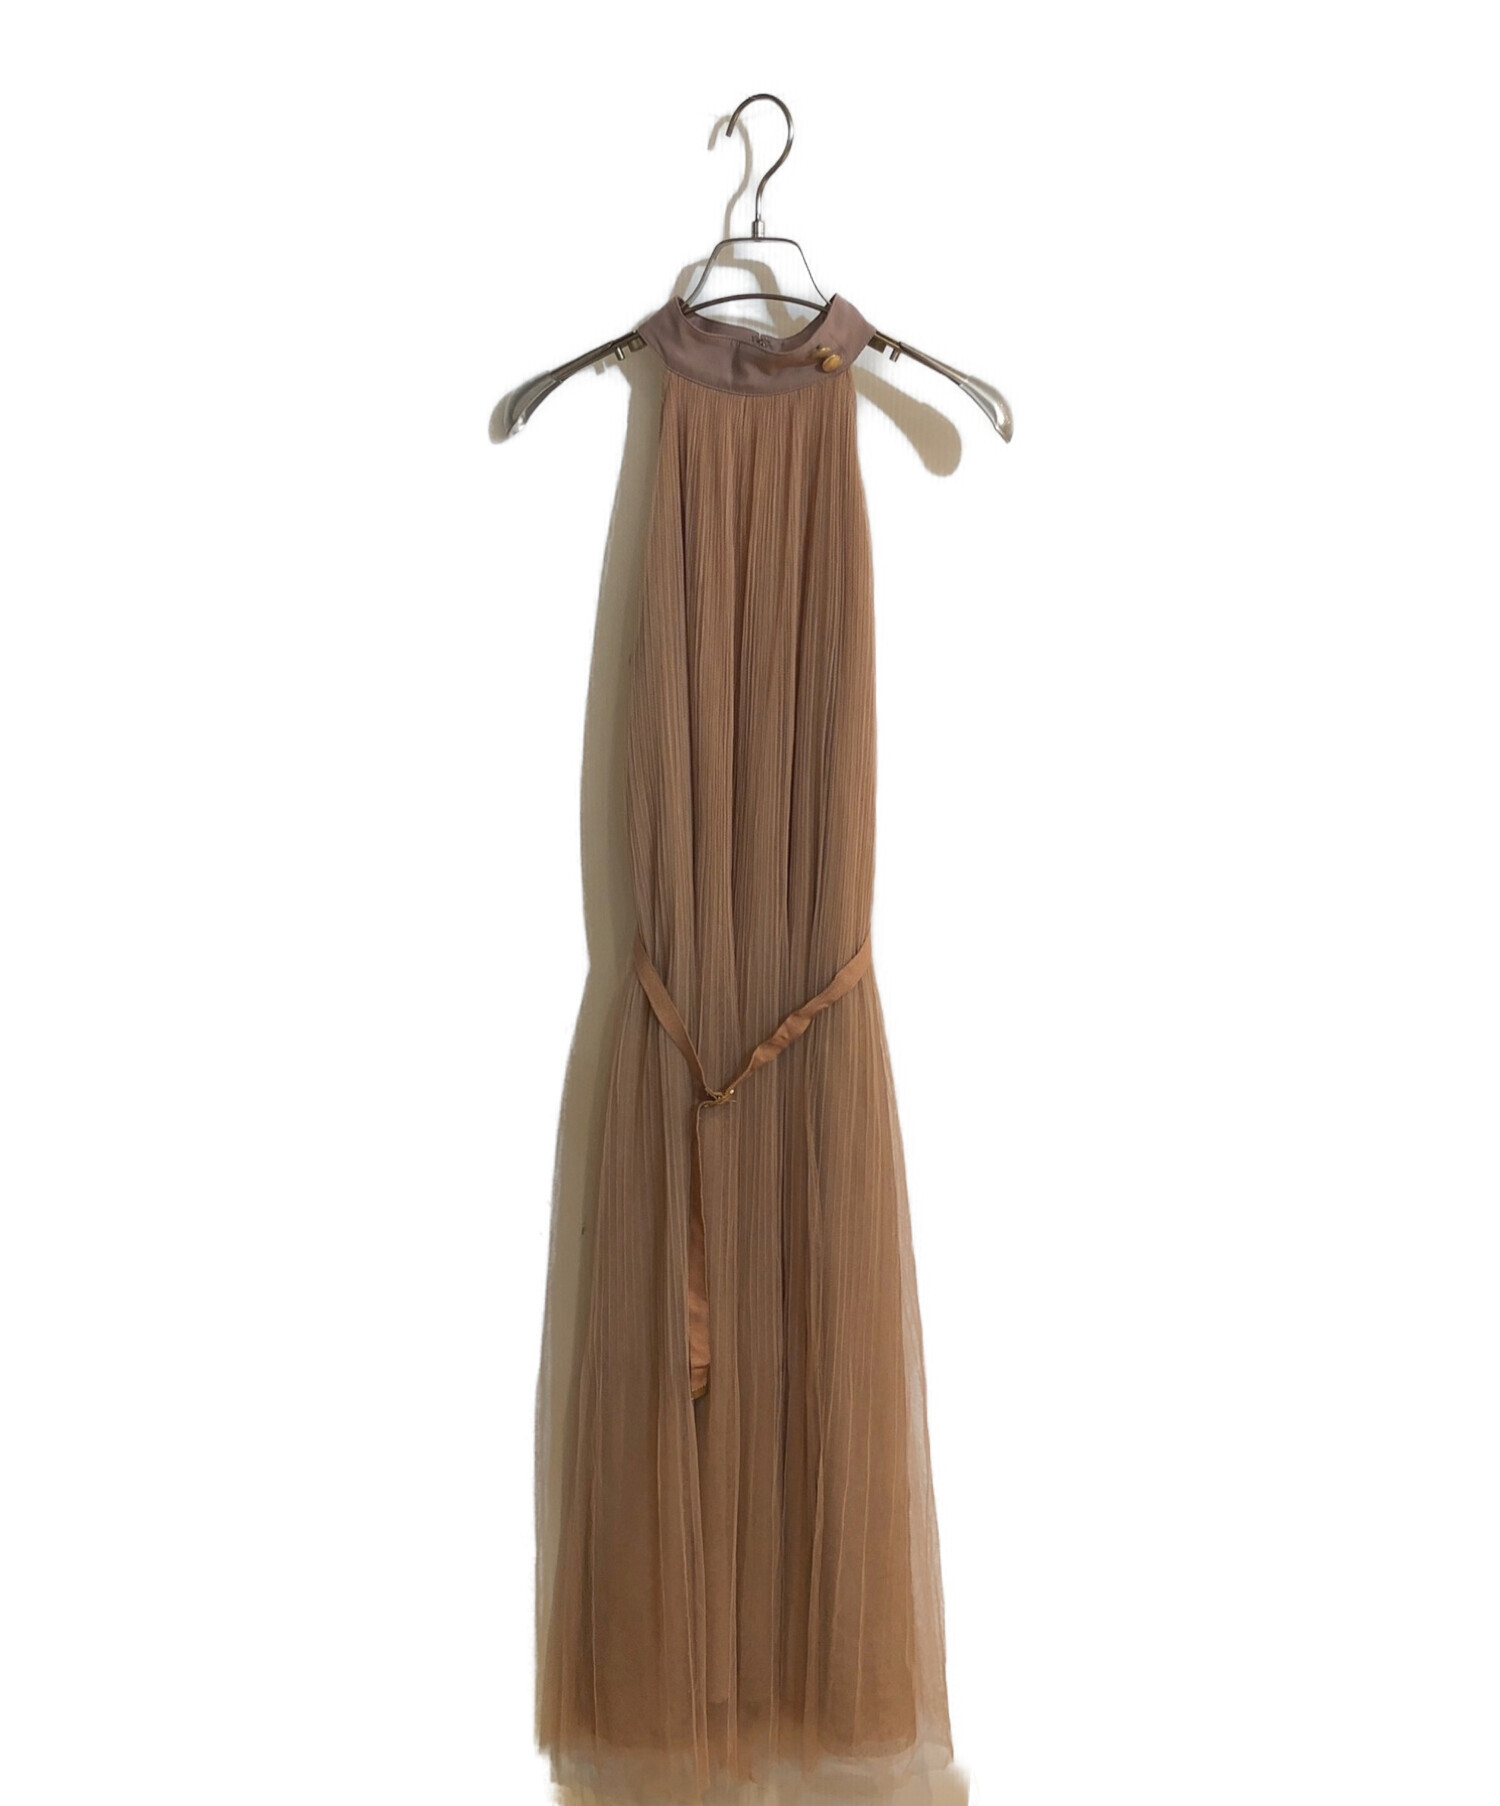 Her lip to Pleated Tulle Midi Dress